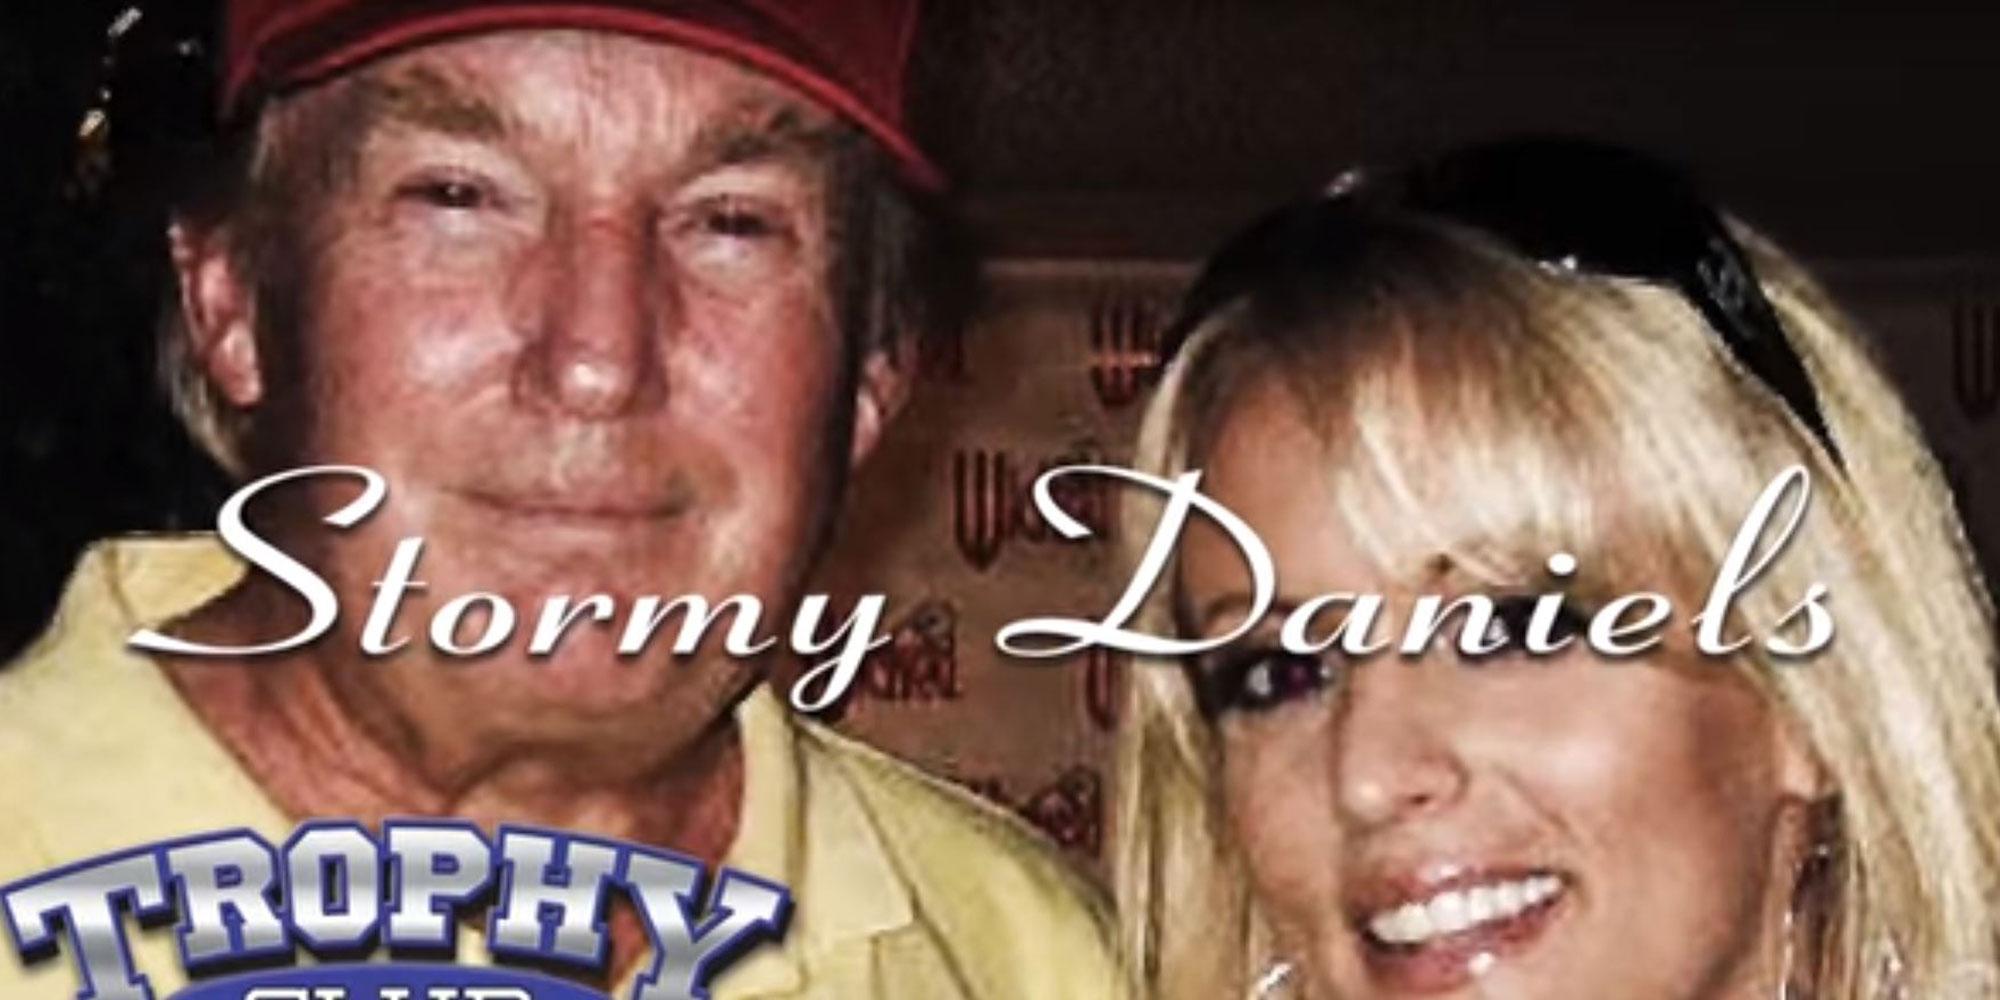 Picture: A poster featuring Donald Trump and Stormy Daniels to promote the porn actress's 'Making America Horny Again' tour